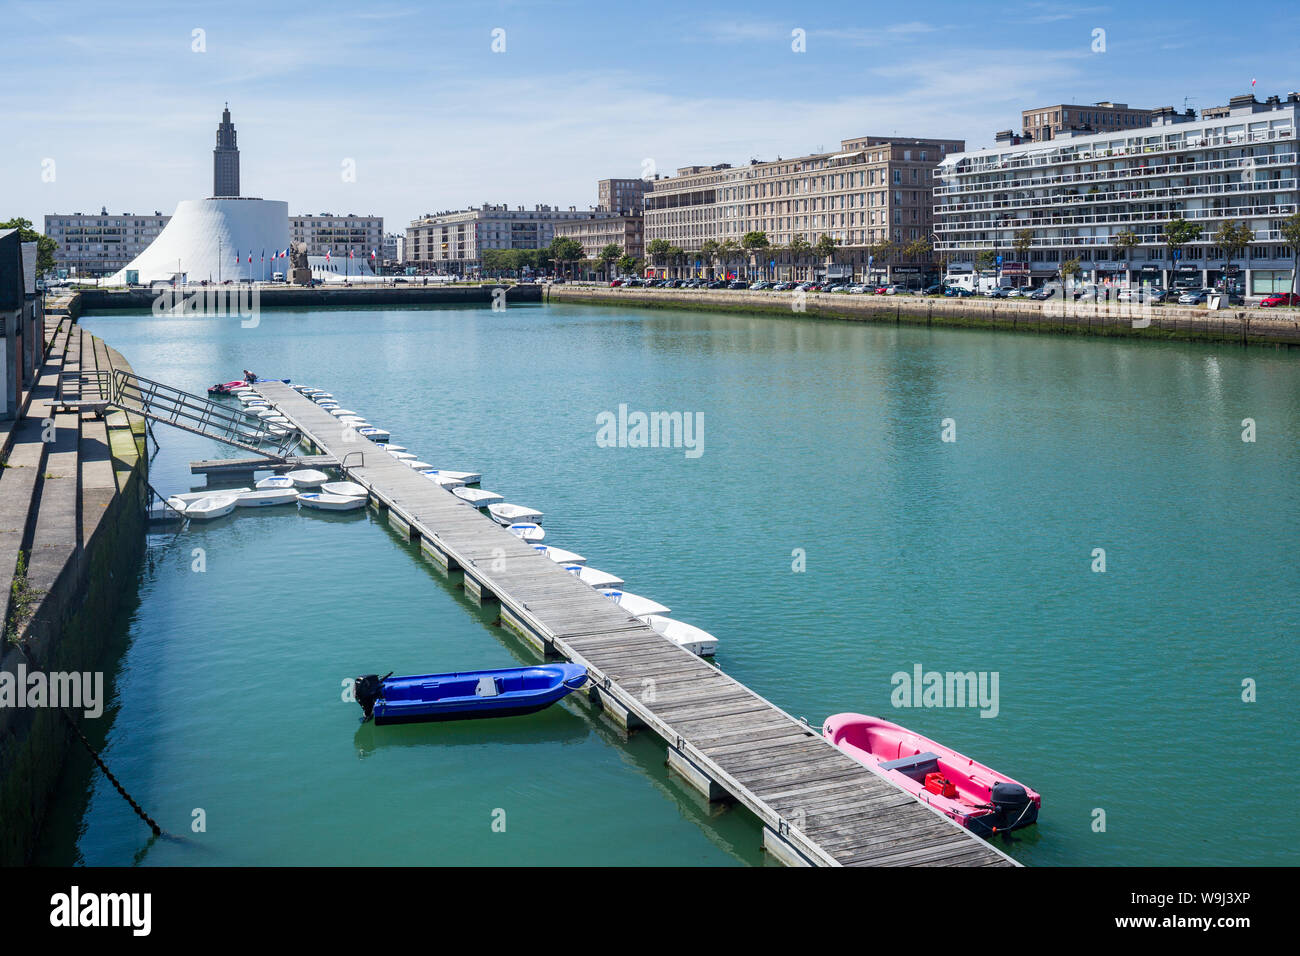 View over the Bassin du Commerce, Le Havre, Normandy, France with Le Volcan and St. Joseph's Church in the distance with a line of pleasure boats Stock Photo